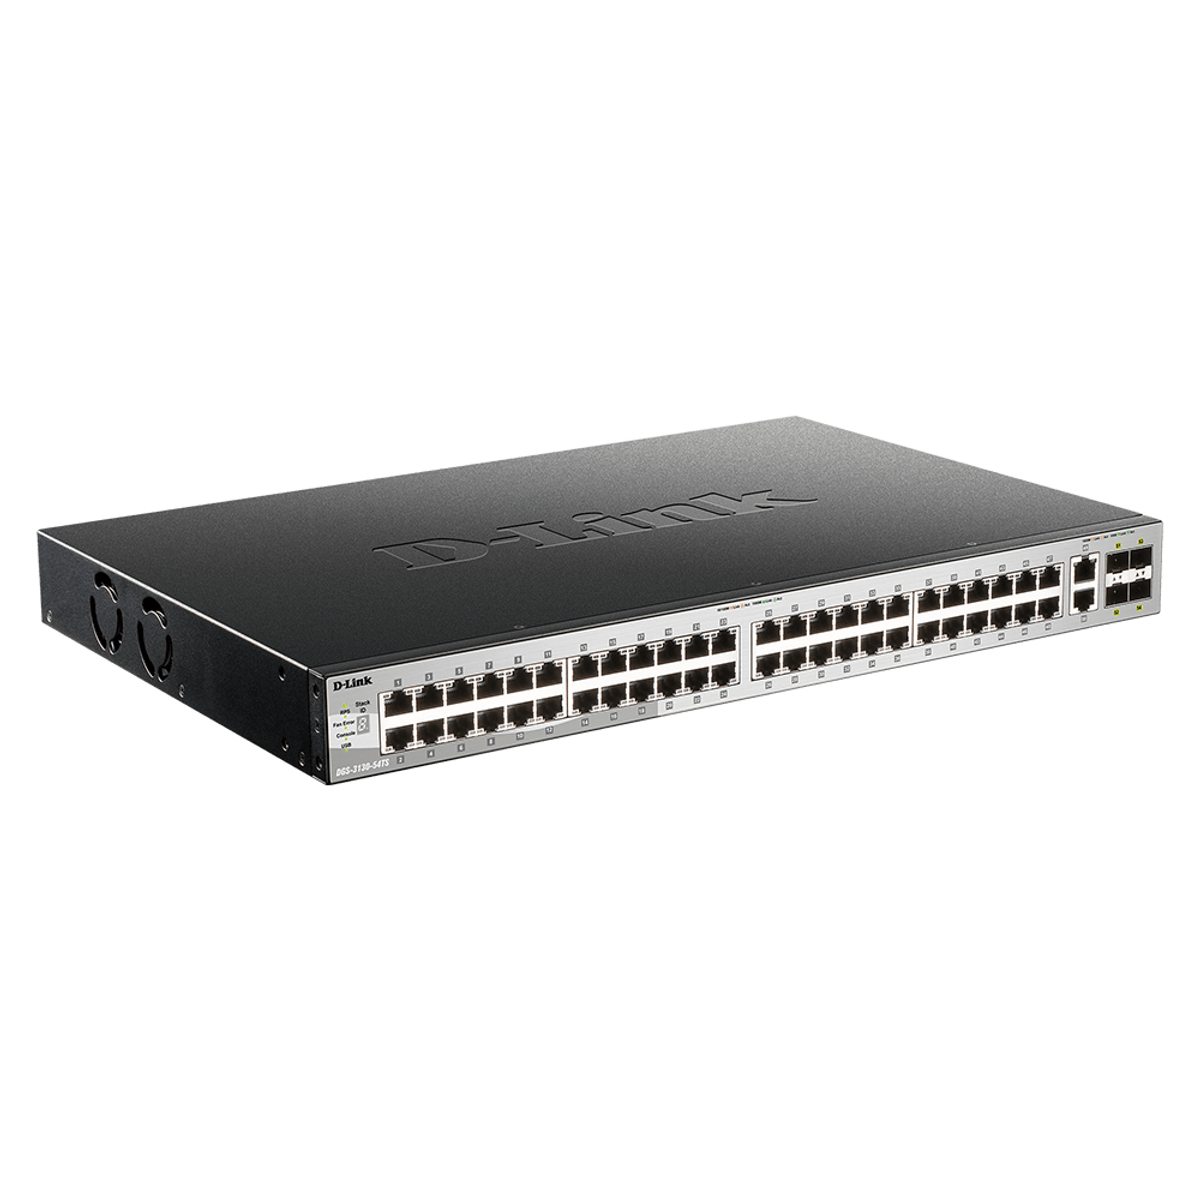 48 x Gb ports L3 Stackable Gb Switch